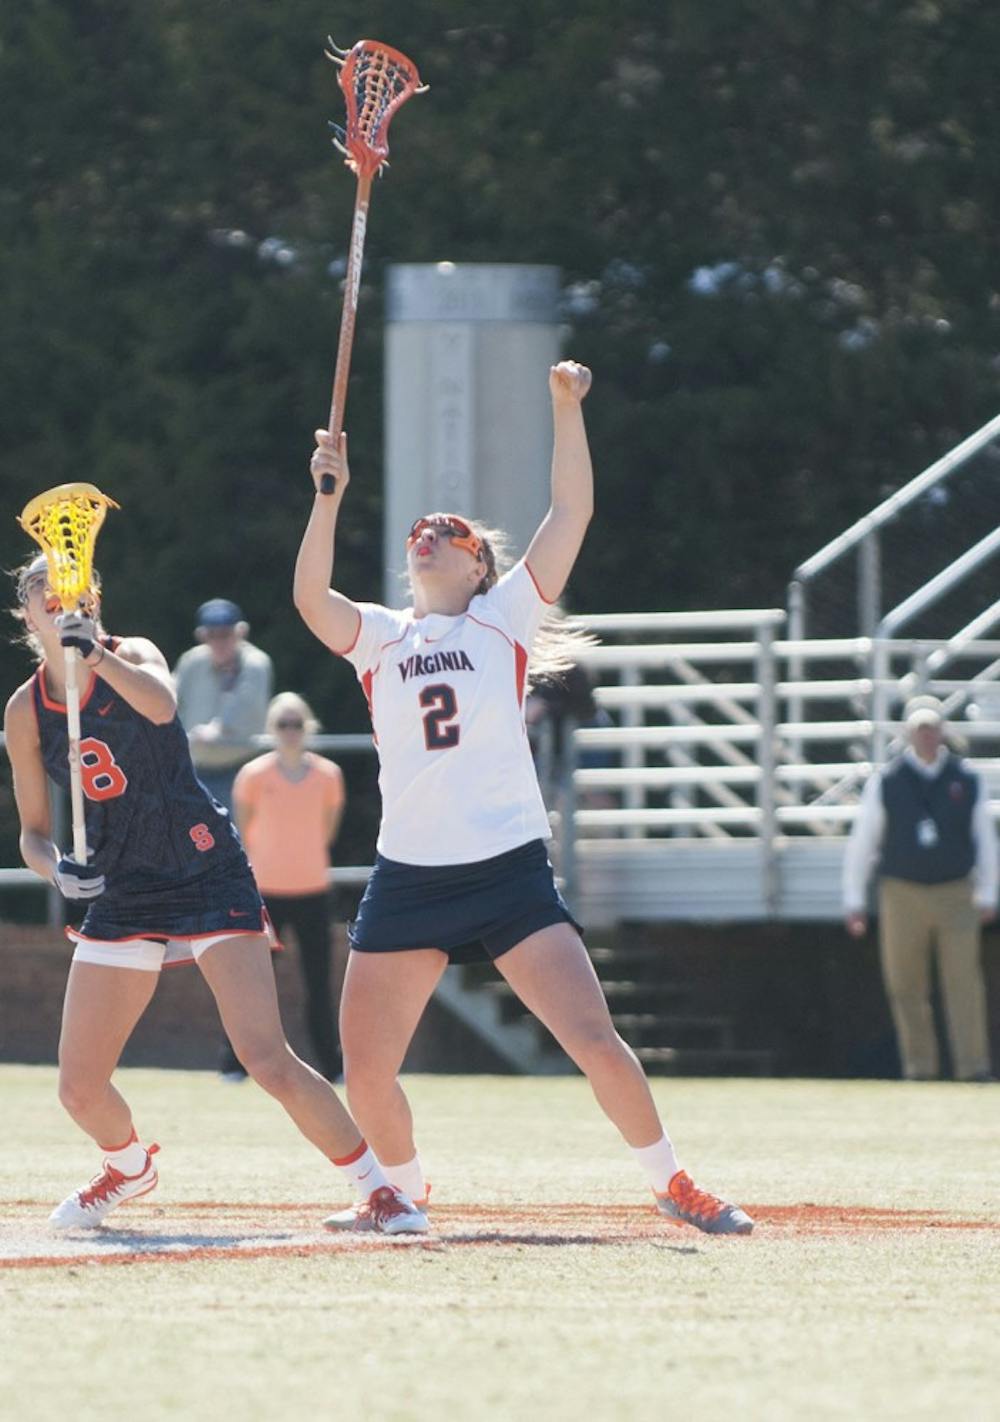 	<p>Sitting at 4-6 (0-3 <span class="caps">ACC</span>) with six games to play in the regular season, senior defender Lauren Goerz and the No. 16 Virginia women&#8217;s lacrosse team are in danger of missing the <span class="caps">NCAA</span> Tournament. The Cavaliers will look to gain momentum Wednesday night in a home game against Old Dominion. </p>